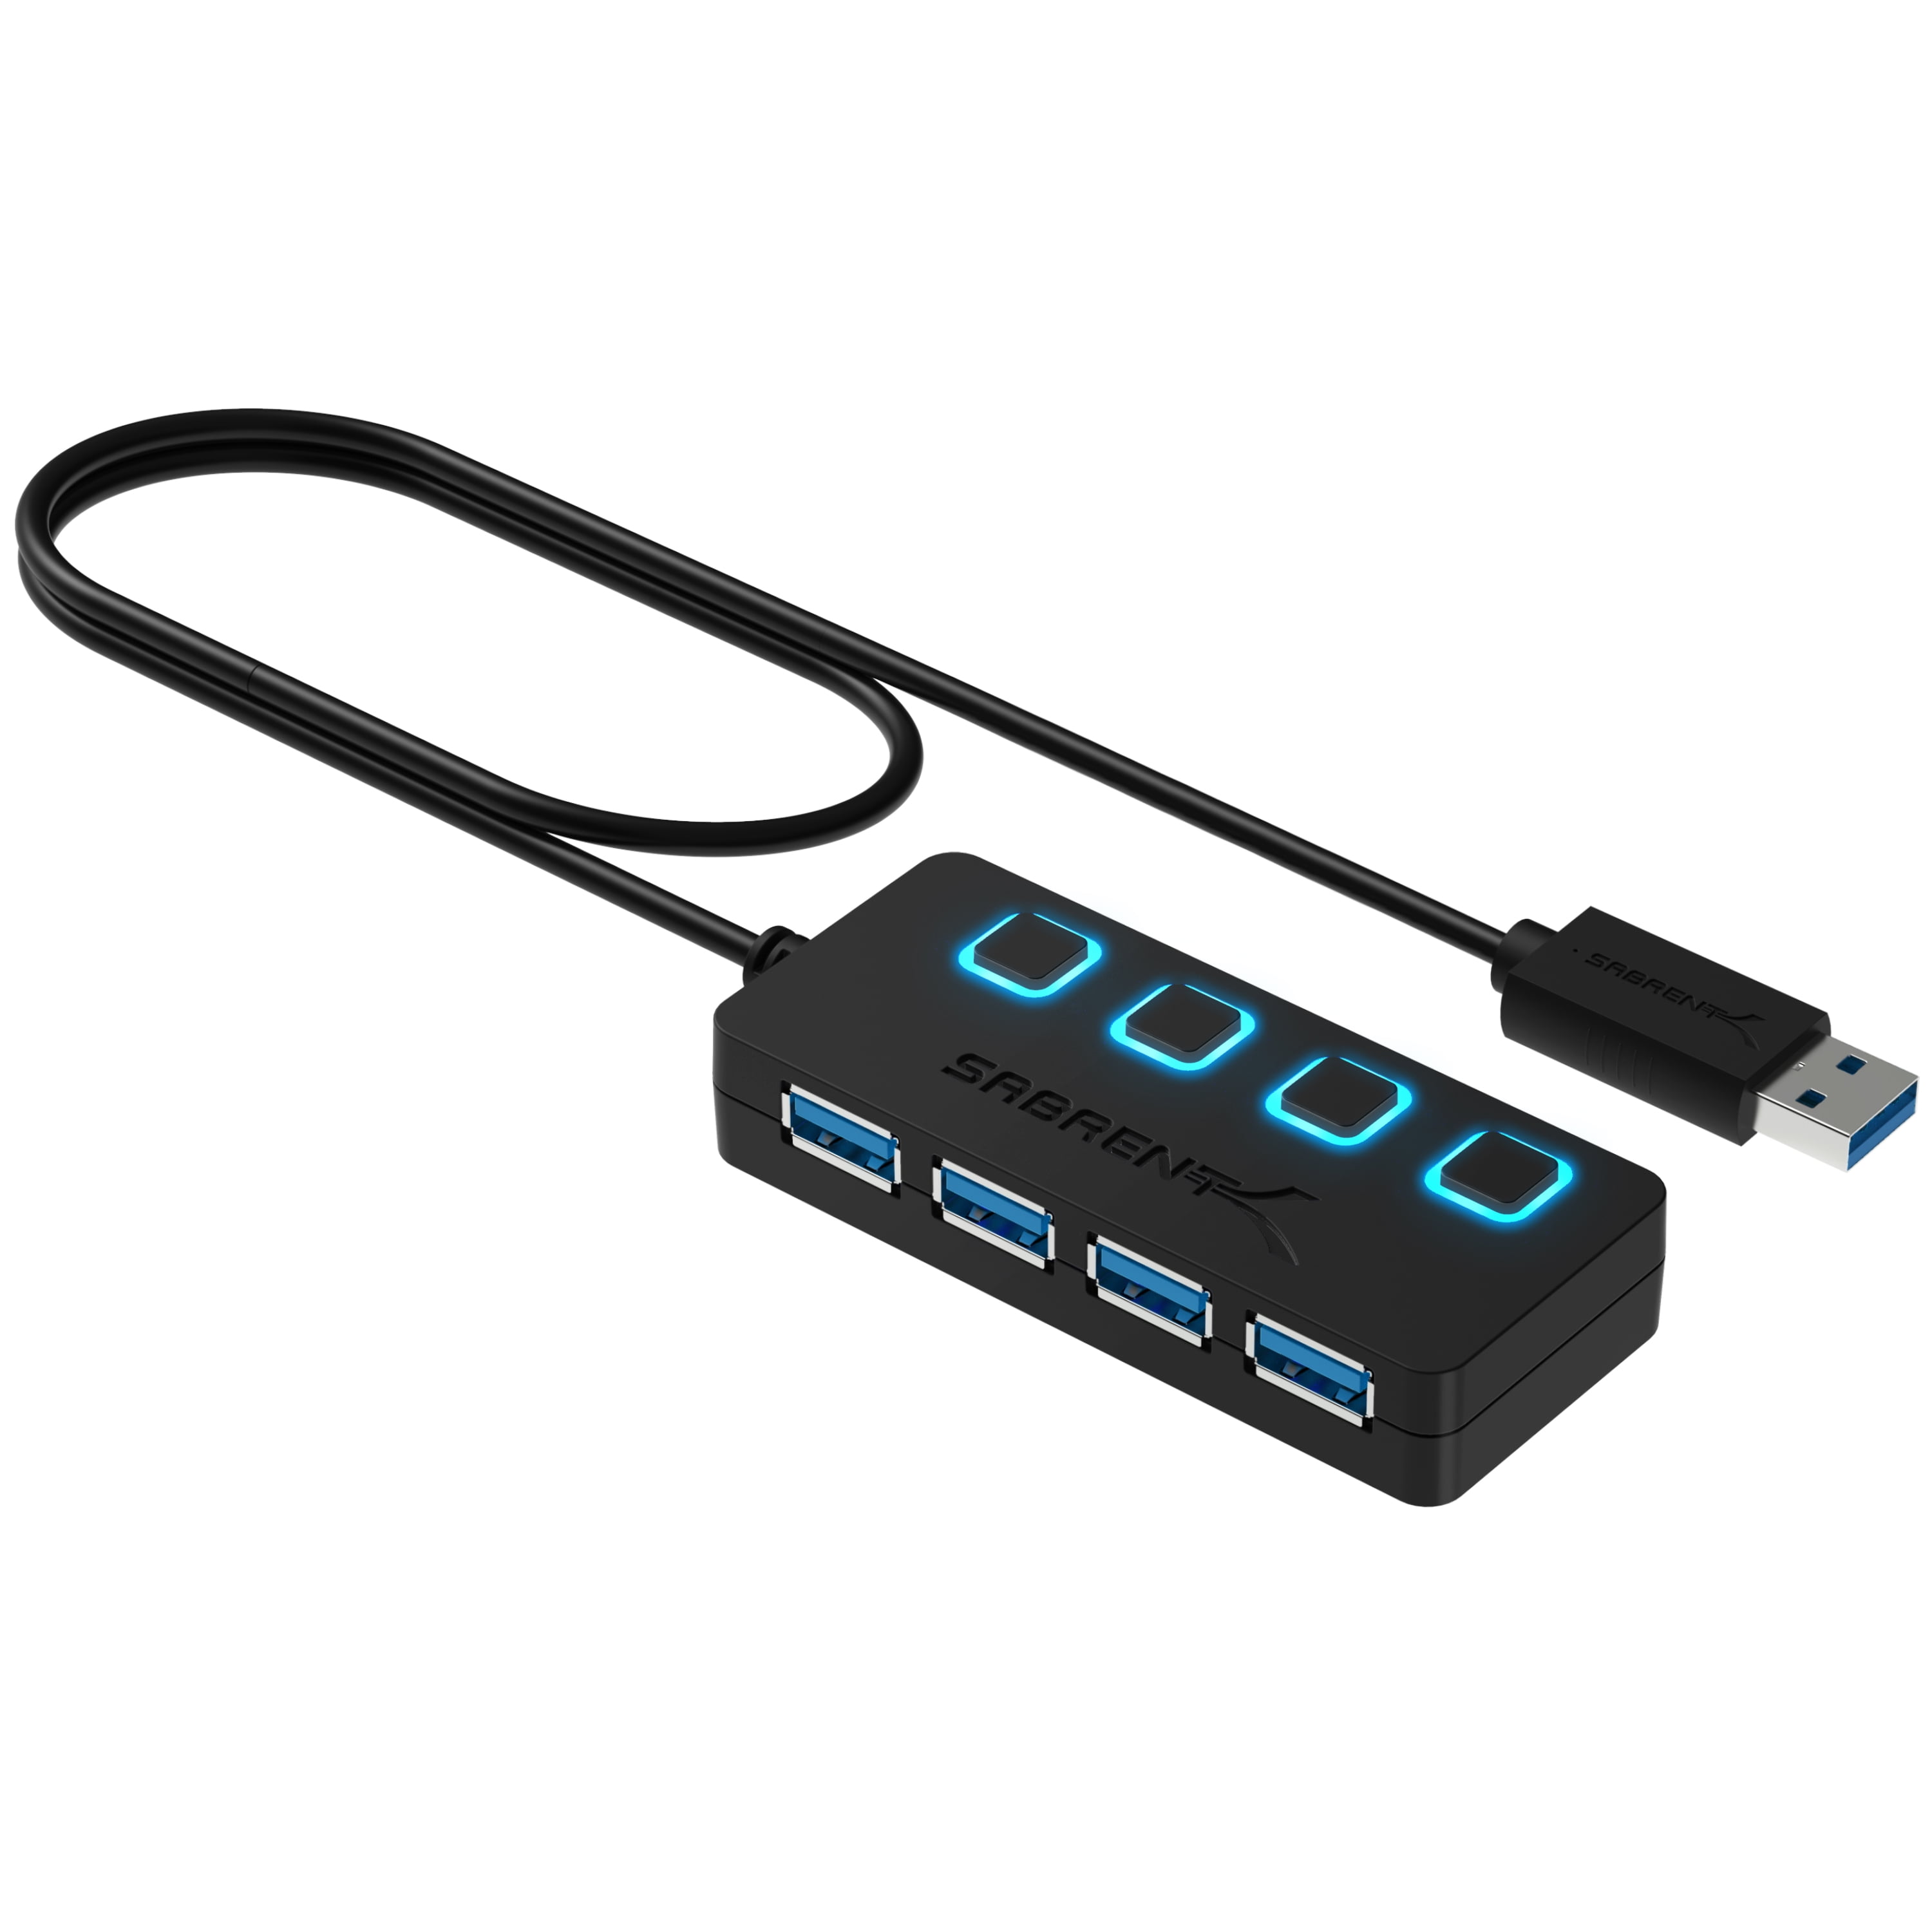 Sabrent 4-Port 3.0 with Individual Power Switches - Walmart.com